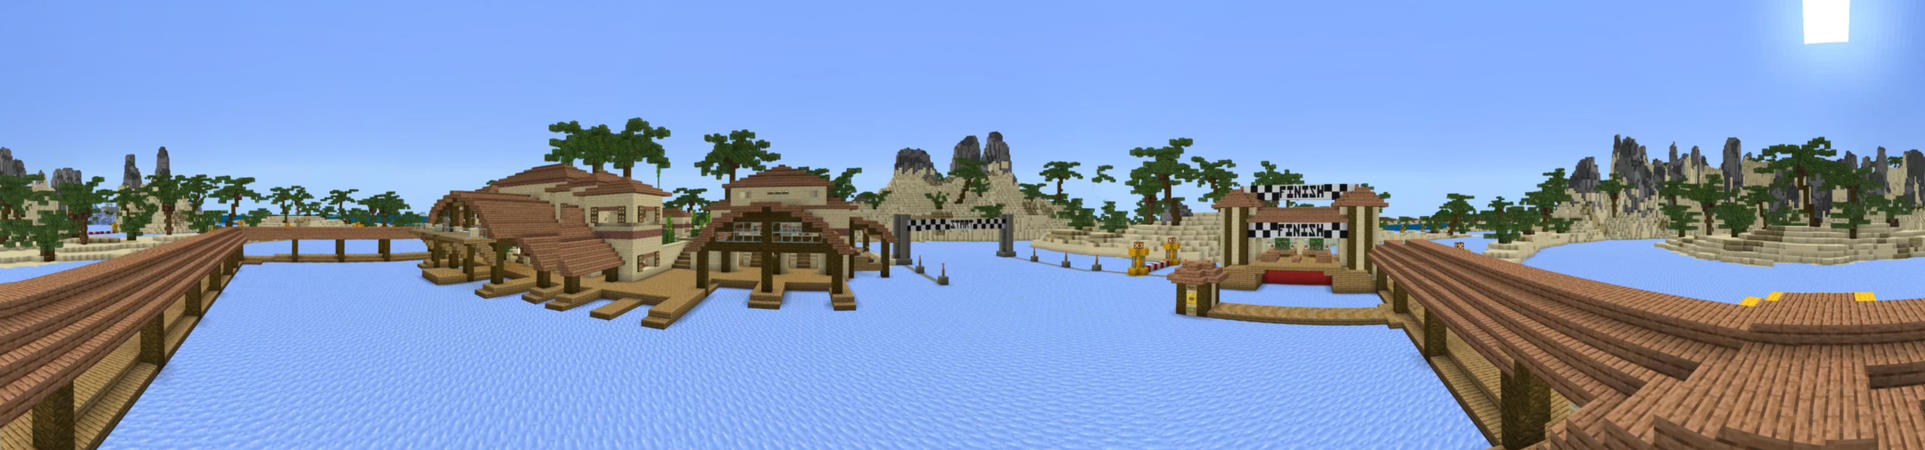 Tropical Boat Race In Minecraft Marketplace Minecraft